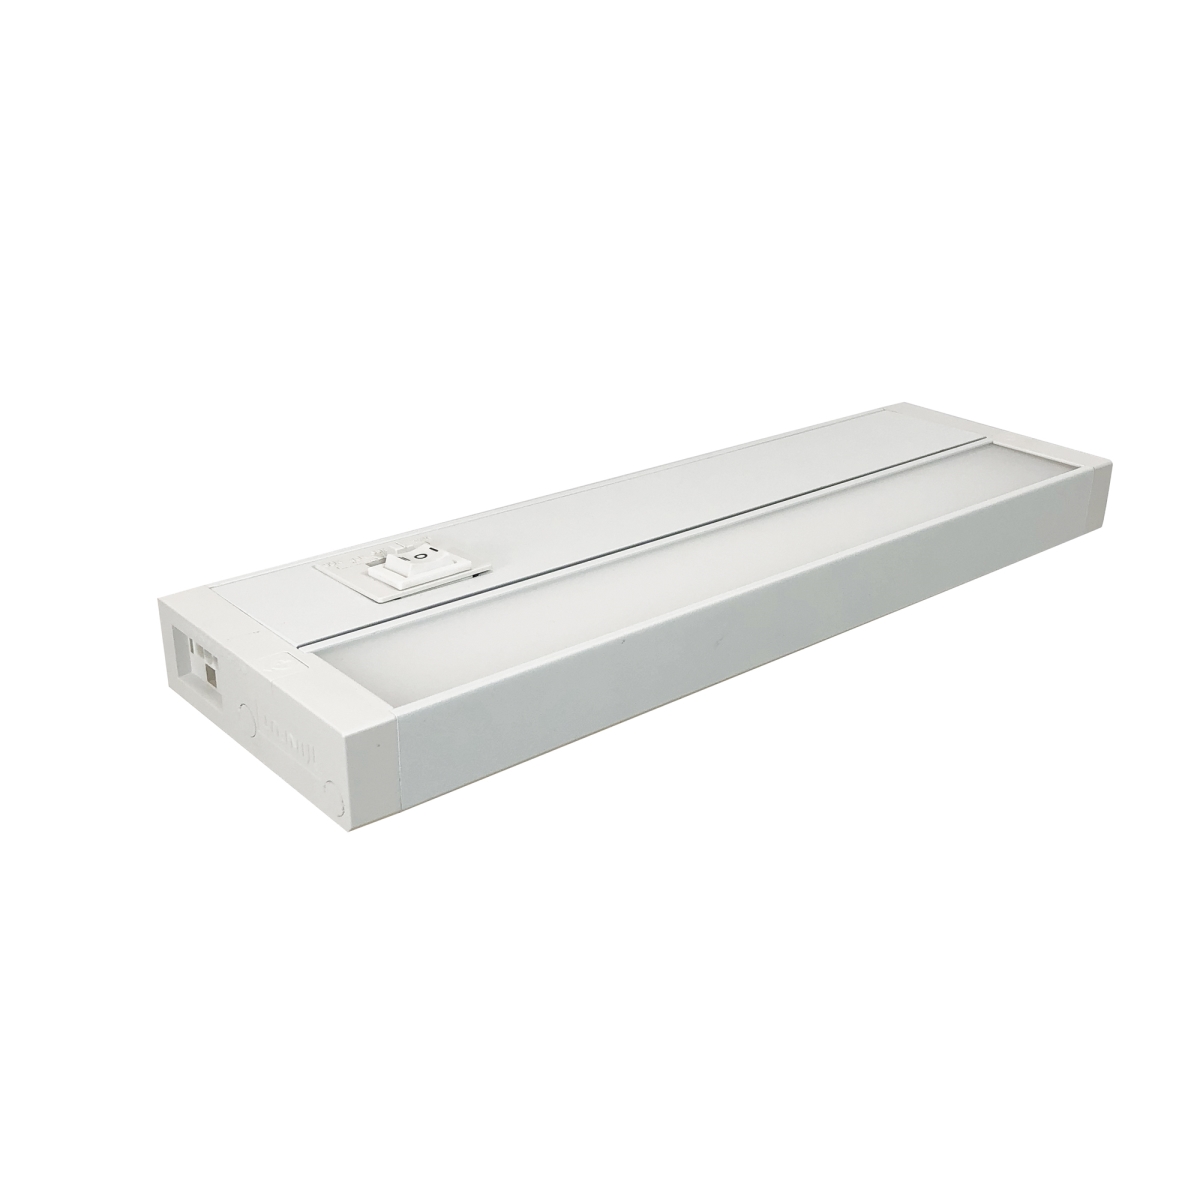 Picture of Nora Lighting NUDTW-8822-23345WH 22 in. Ledur Tunable White LED Undercabinet Light, White